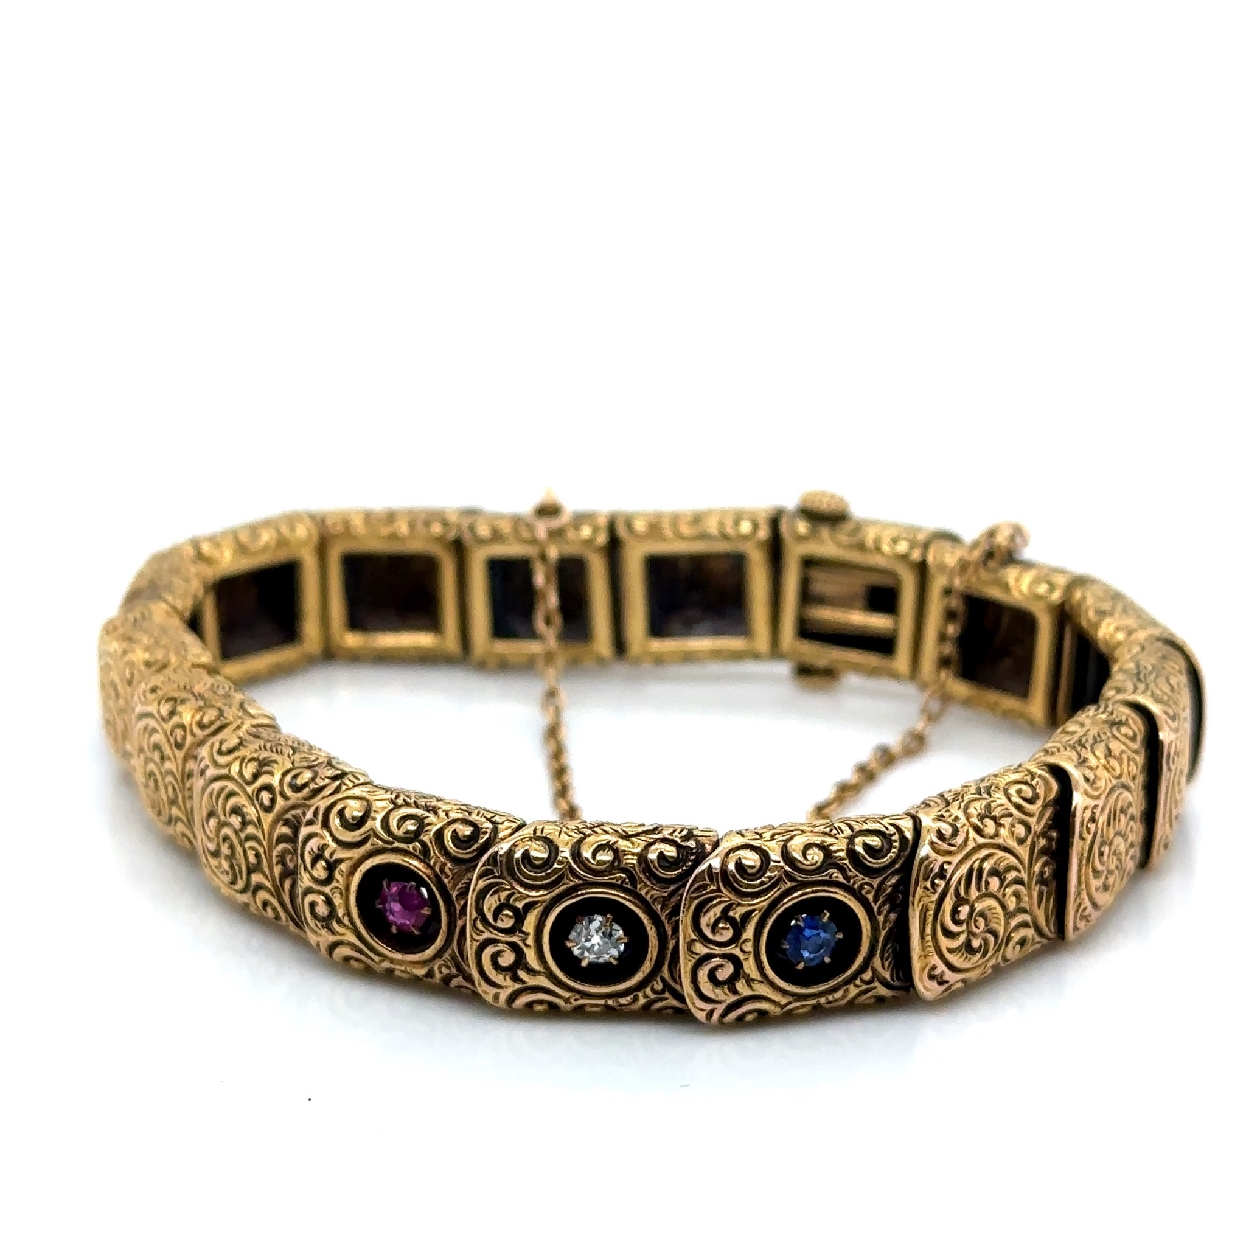 Antique 14K Yellow Gold Victorian Bracelet with Sapphire; Diamond; and Ruby 7 Inches